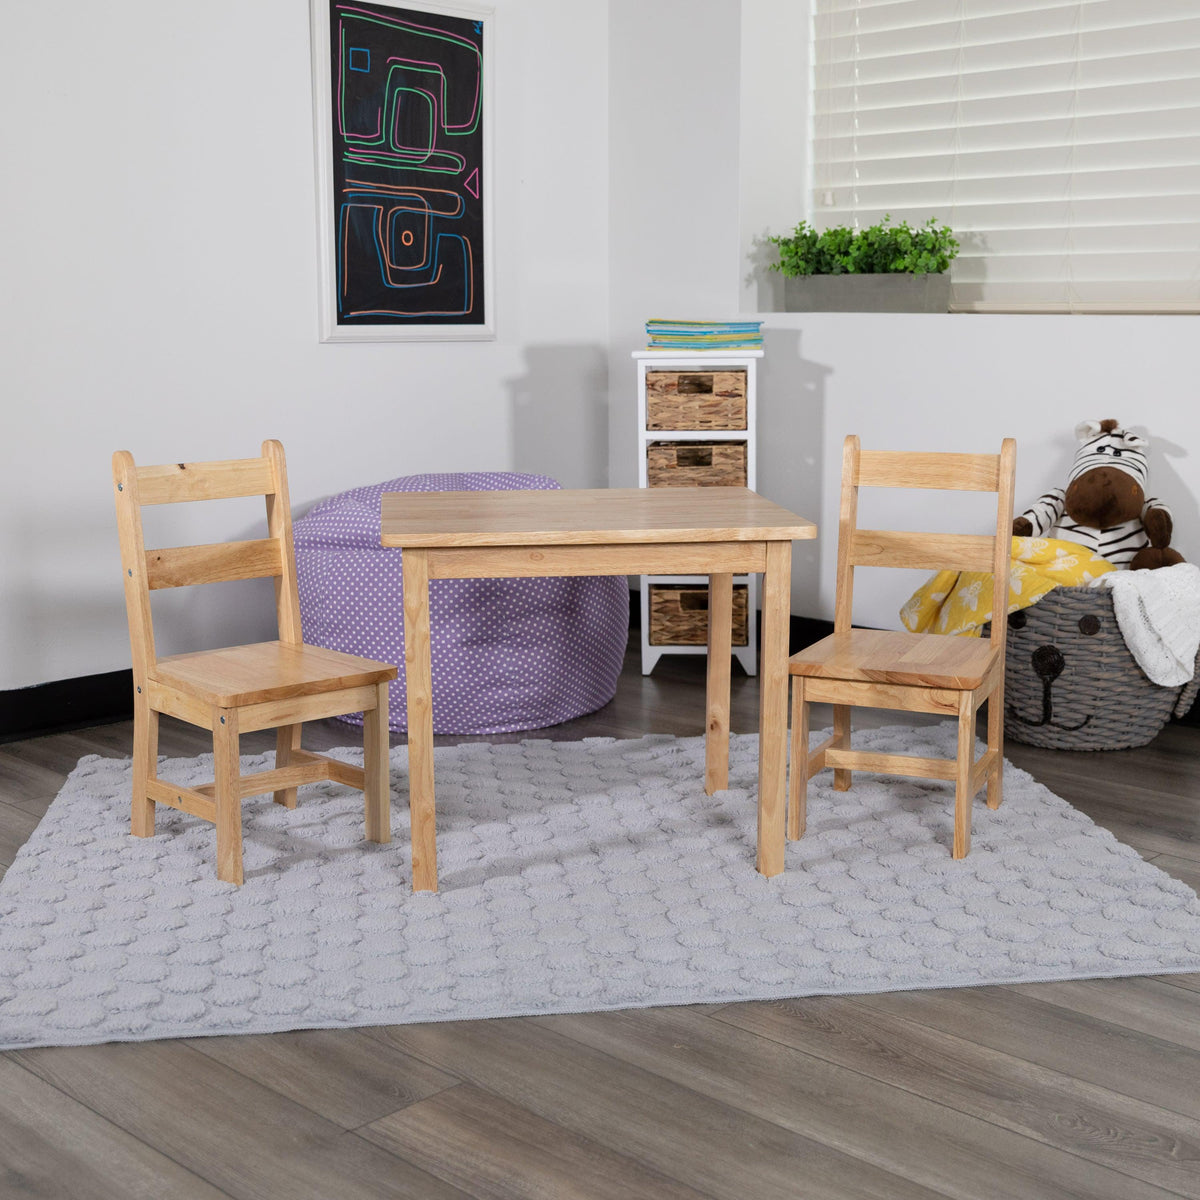 Natural |#| Kids 3 Piece Solid Hardwood Table and Chair Set for Playroom, Kitchen - Natural